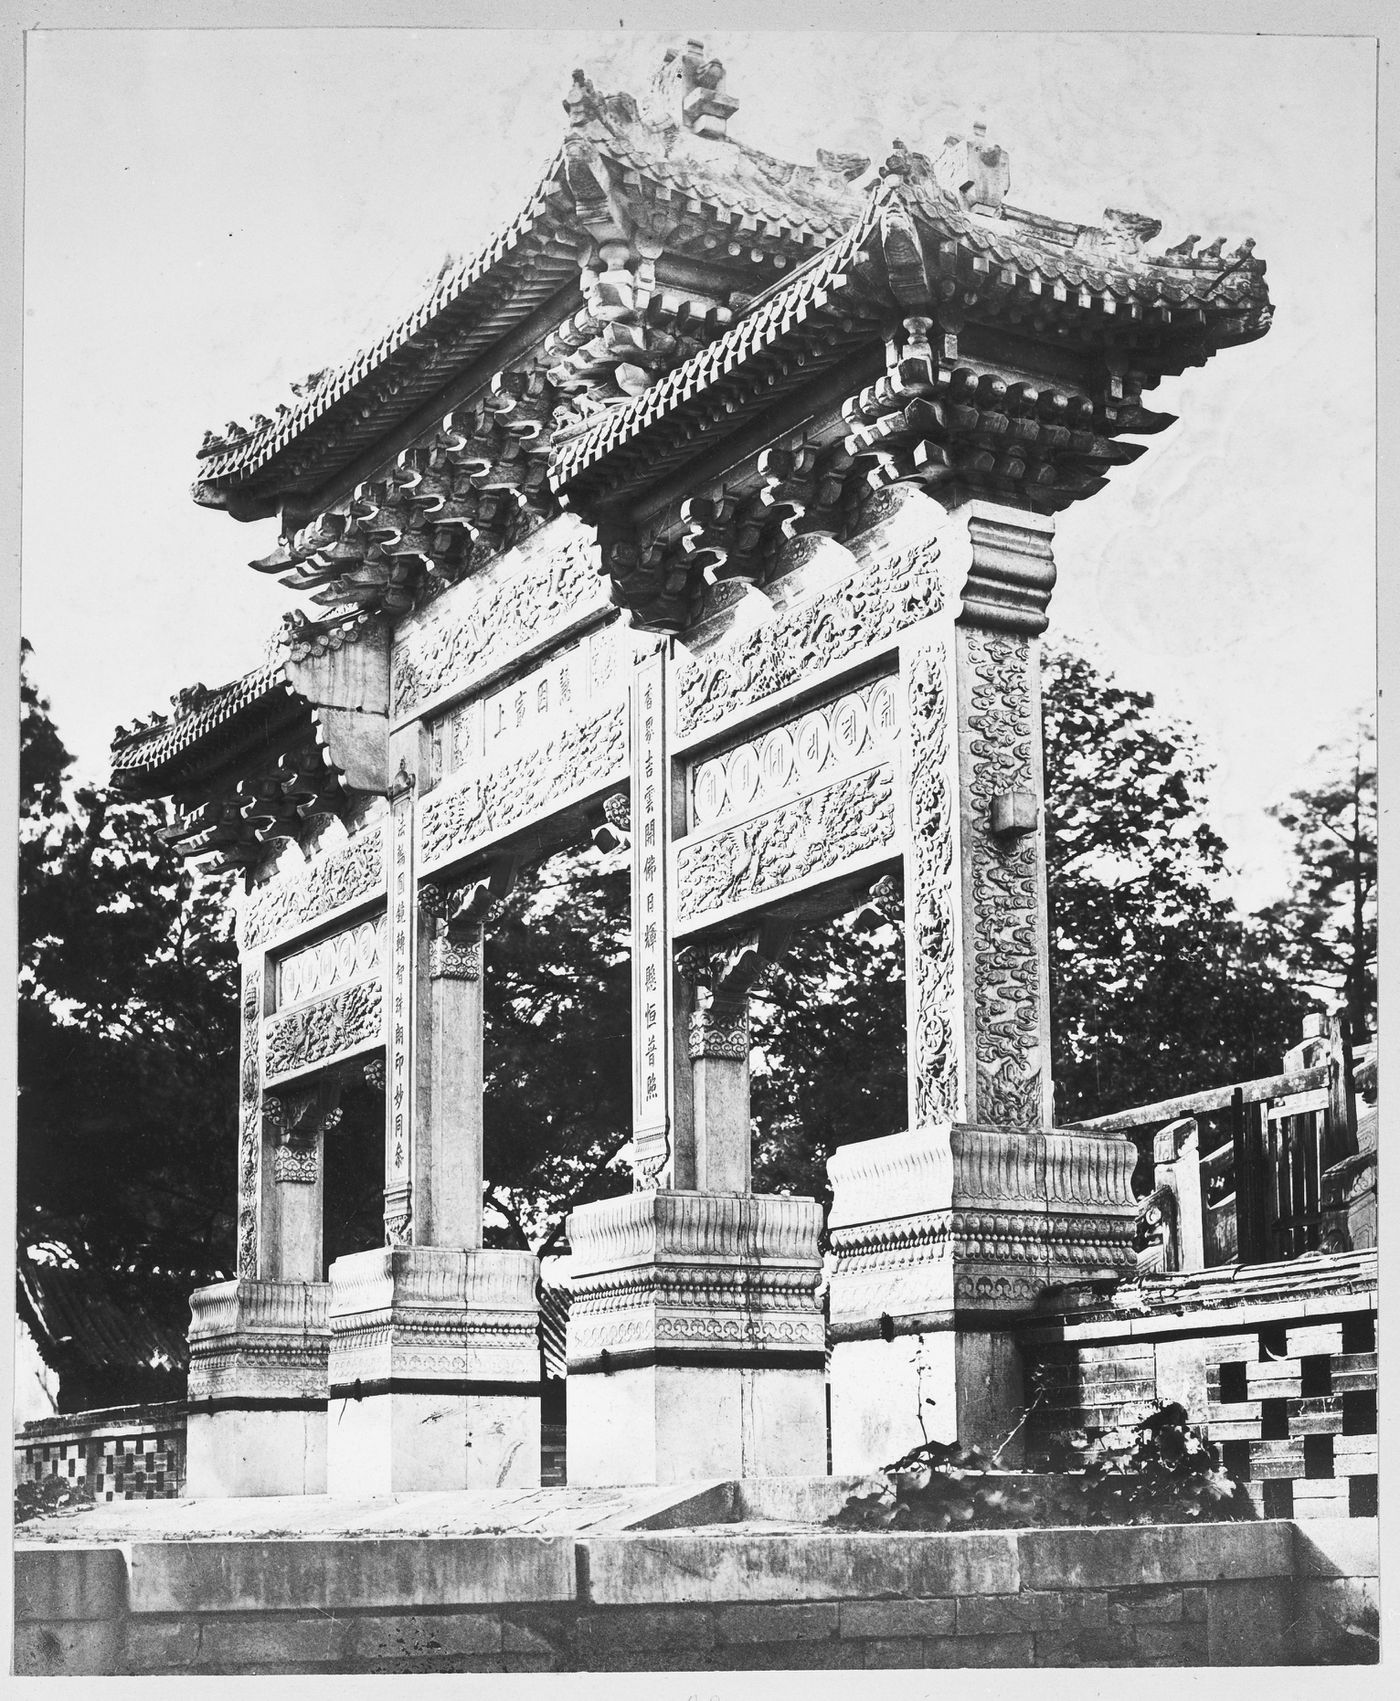 View of the p'ai-lou at the entrance to the Panchen Pagoda (also known as the Qing Jing Huayu Dagoba), West Yellow Temple [Xi Huangsi], Peking (now Beijing), China